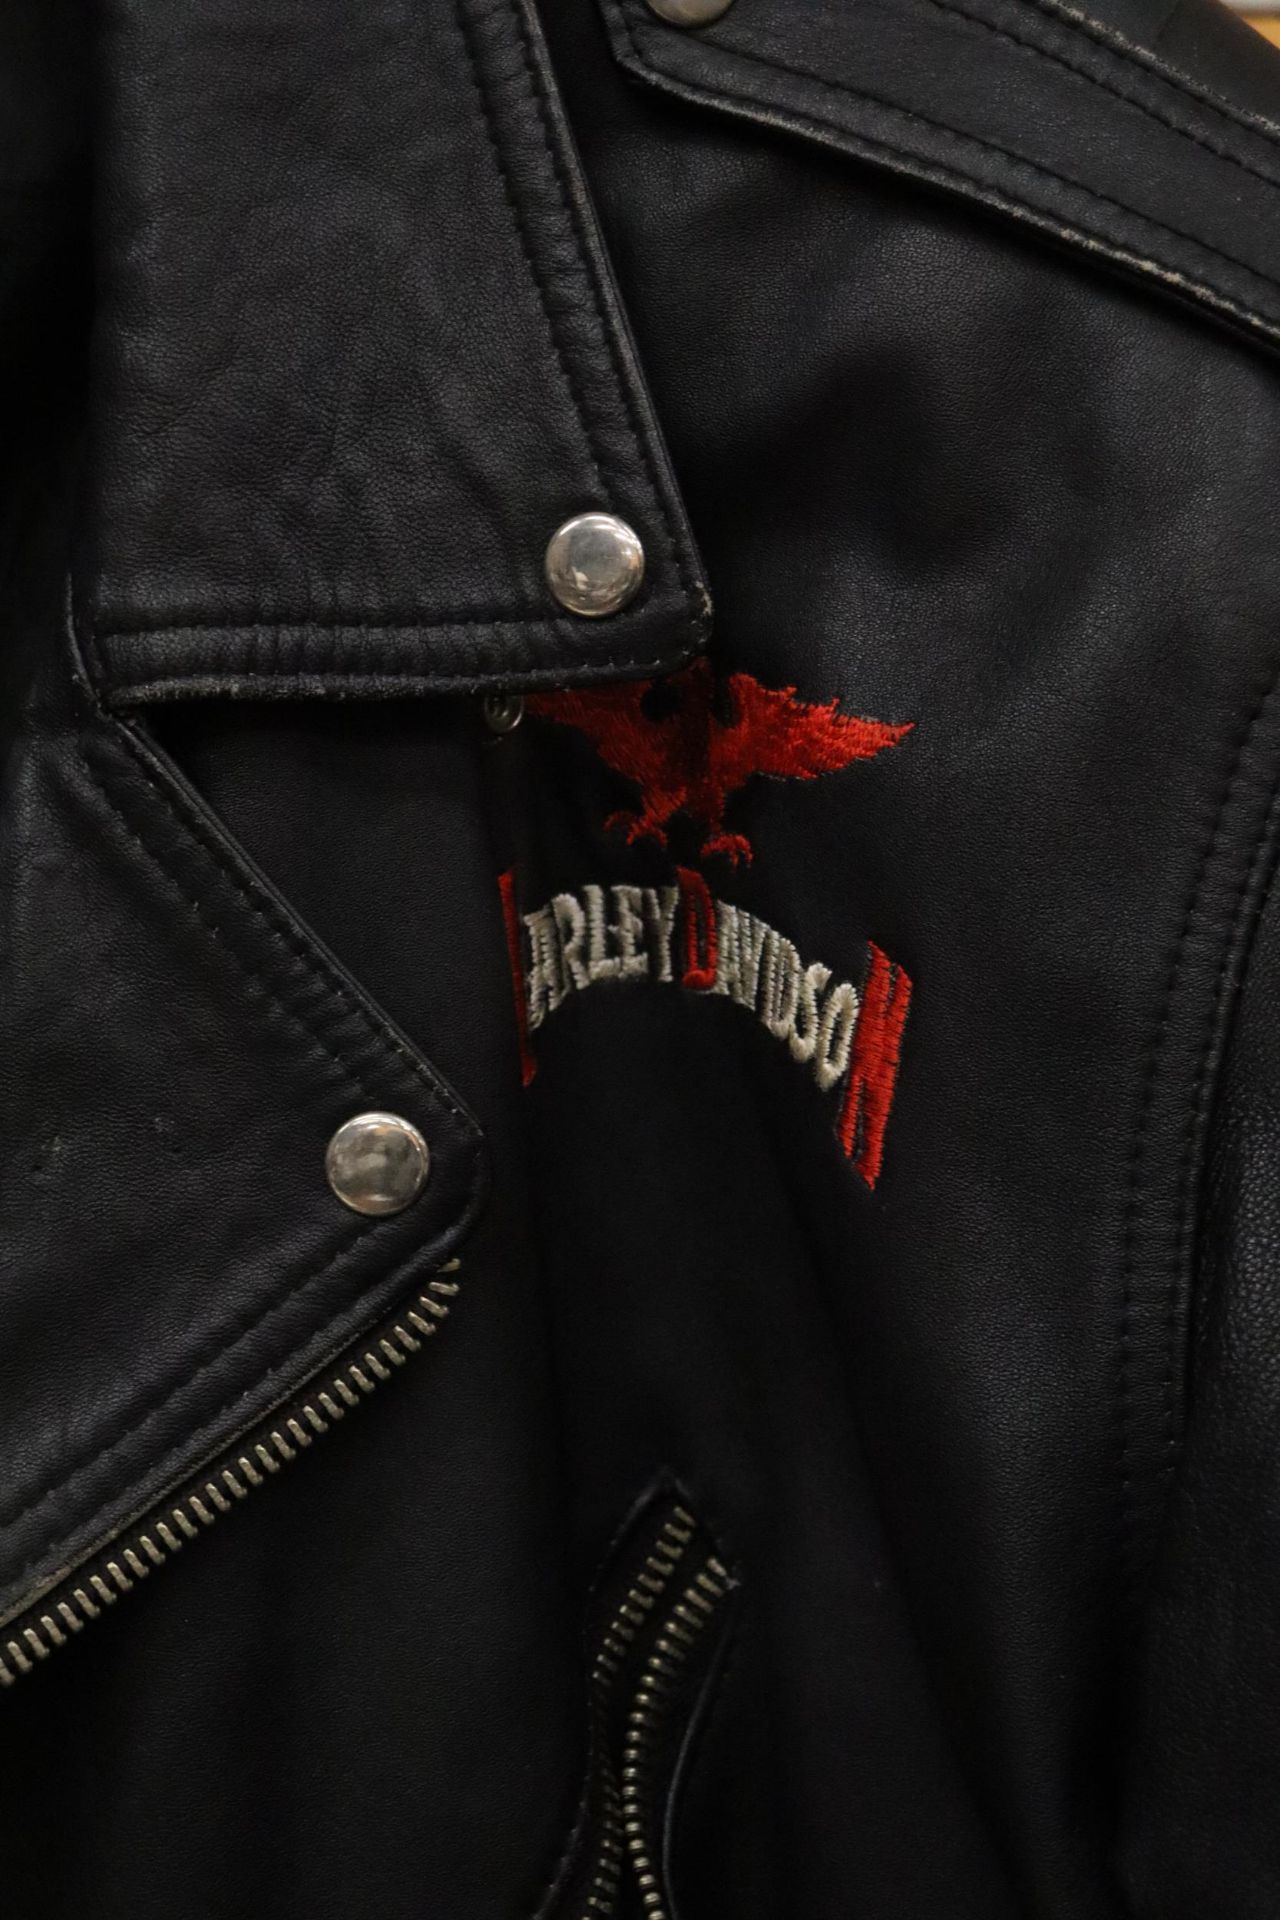 A VINTAGE HARLEY DAVIDSON LEATHER MOTOR CYCLE JACKET WITH LOGO TO THE BACK - Image 6 of 11